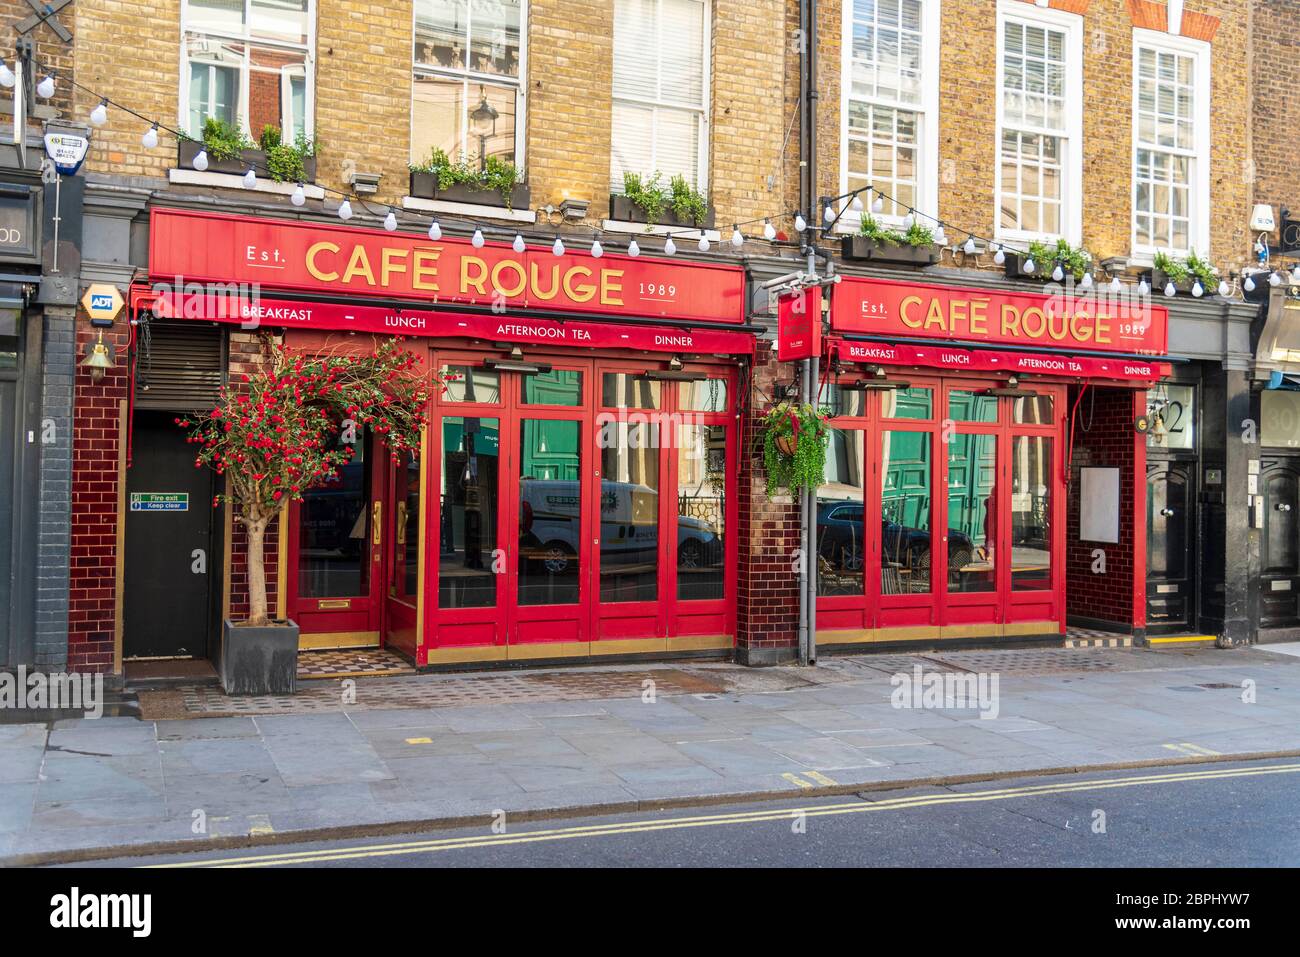 London, UK. 19th May, 2020. French-styled restaurant chain, Café Rouge seen  at The Wellington, London.The owner of the Bella Italia and Café Rouge  restaurant chains has said it is considering administration as